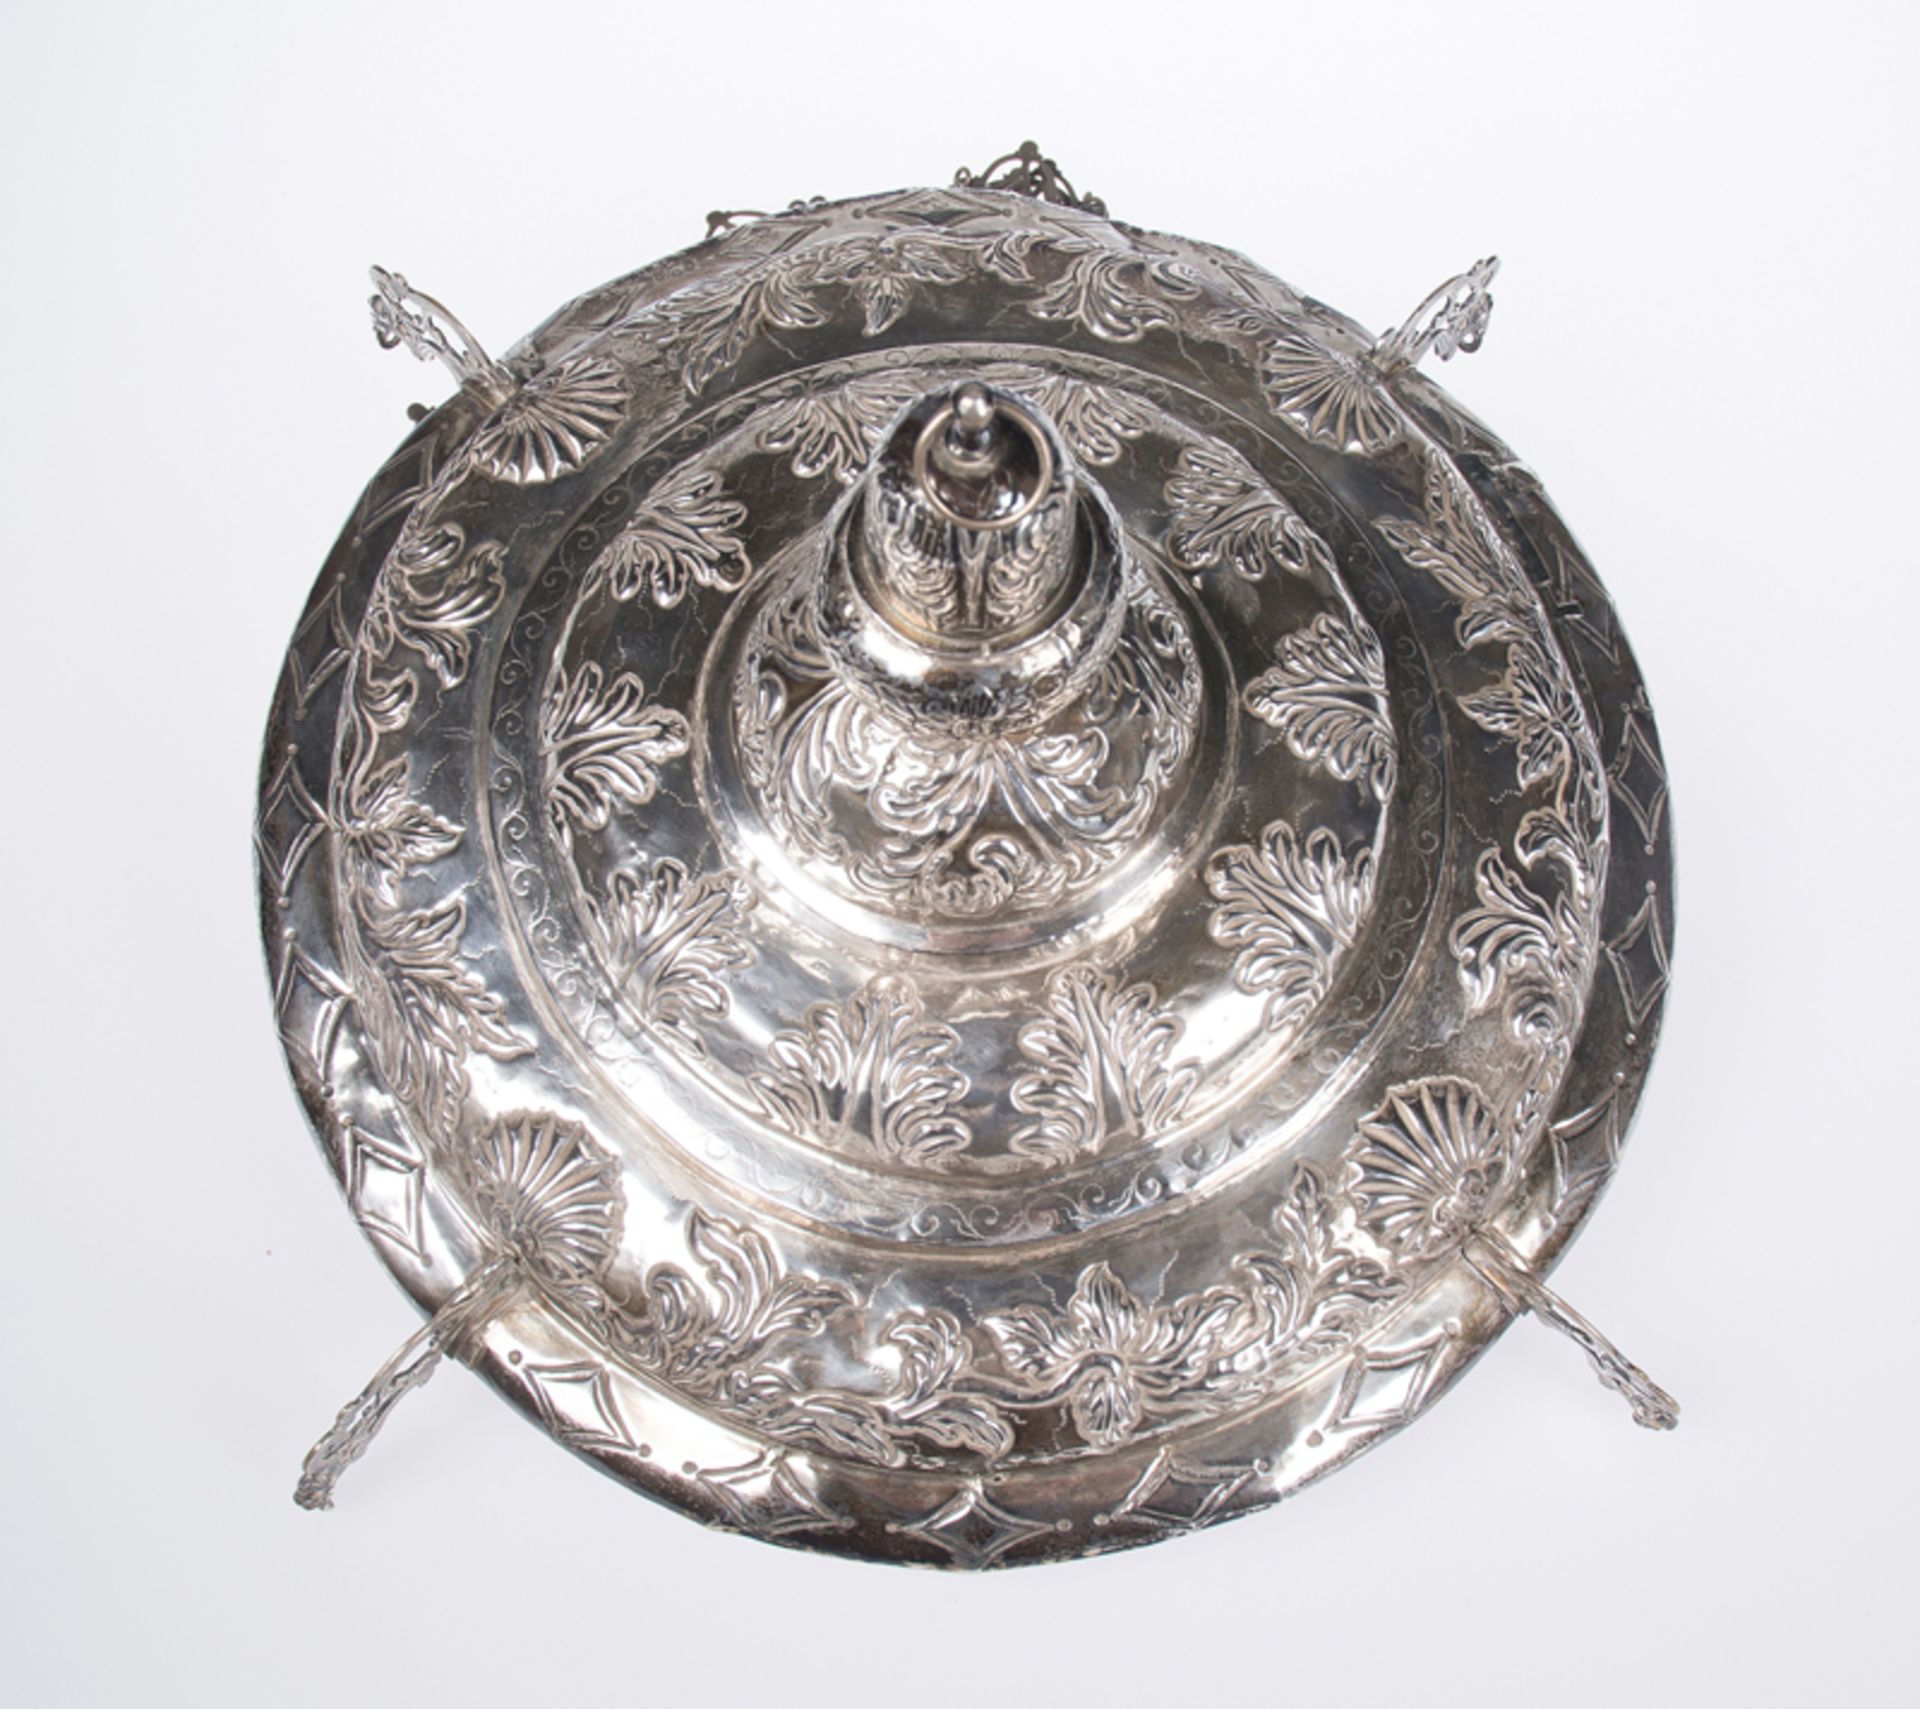 Embossed and chased silver votive lamp. 17th - 18th century.Embossed and chased silver votive - Image 2 of 2